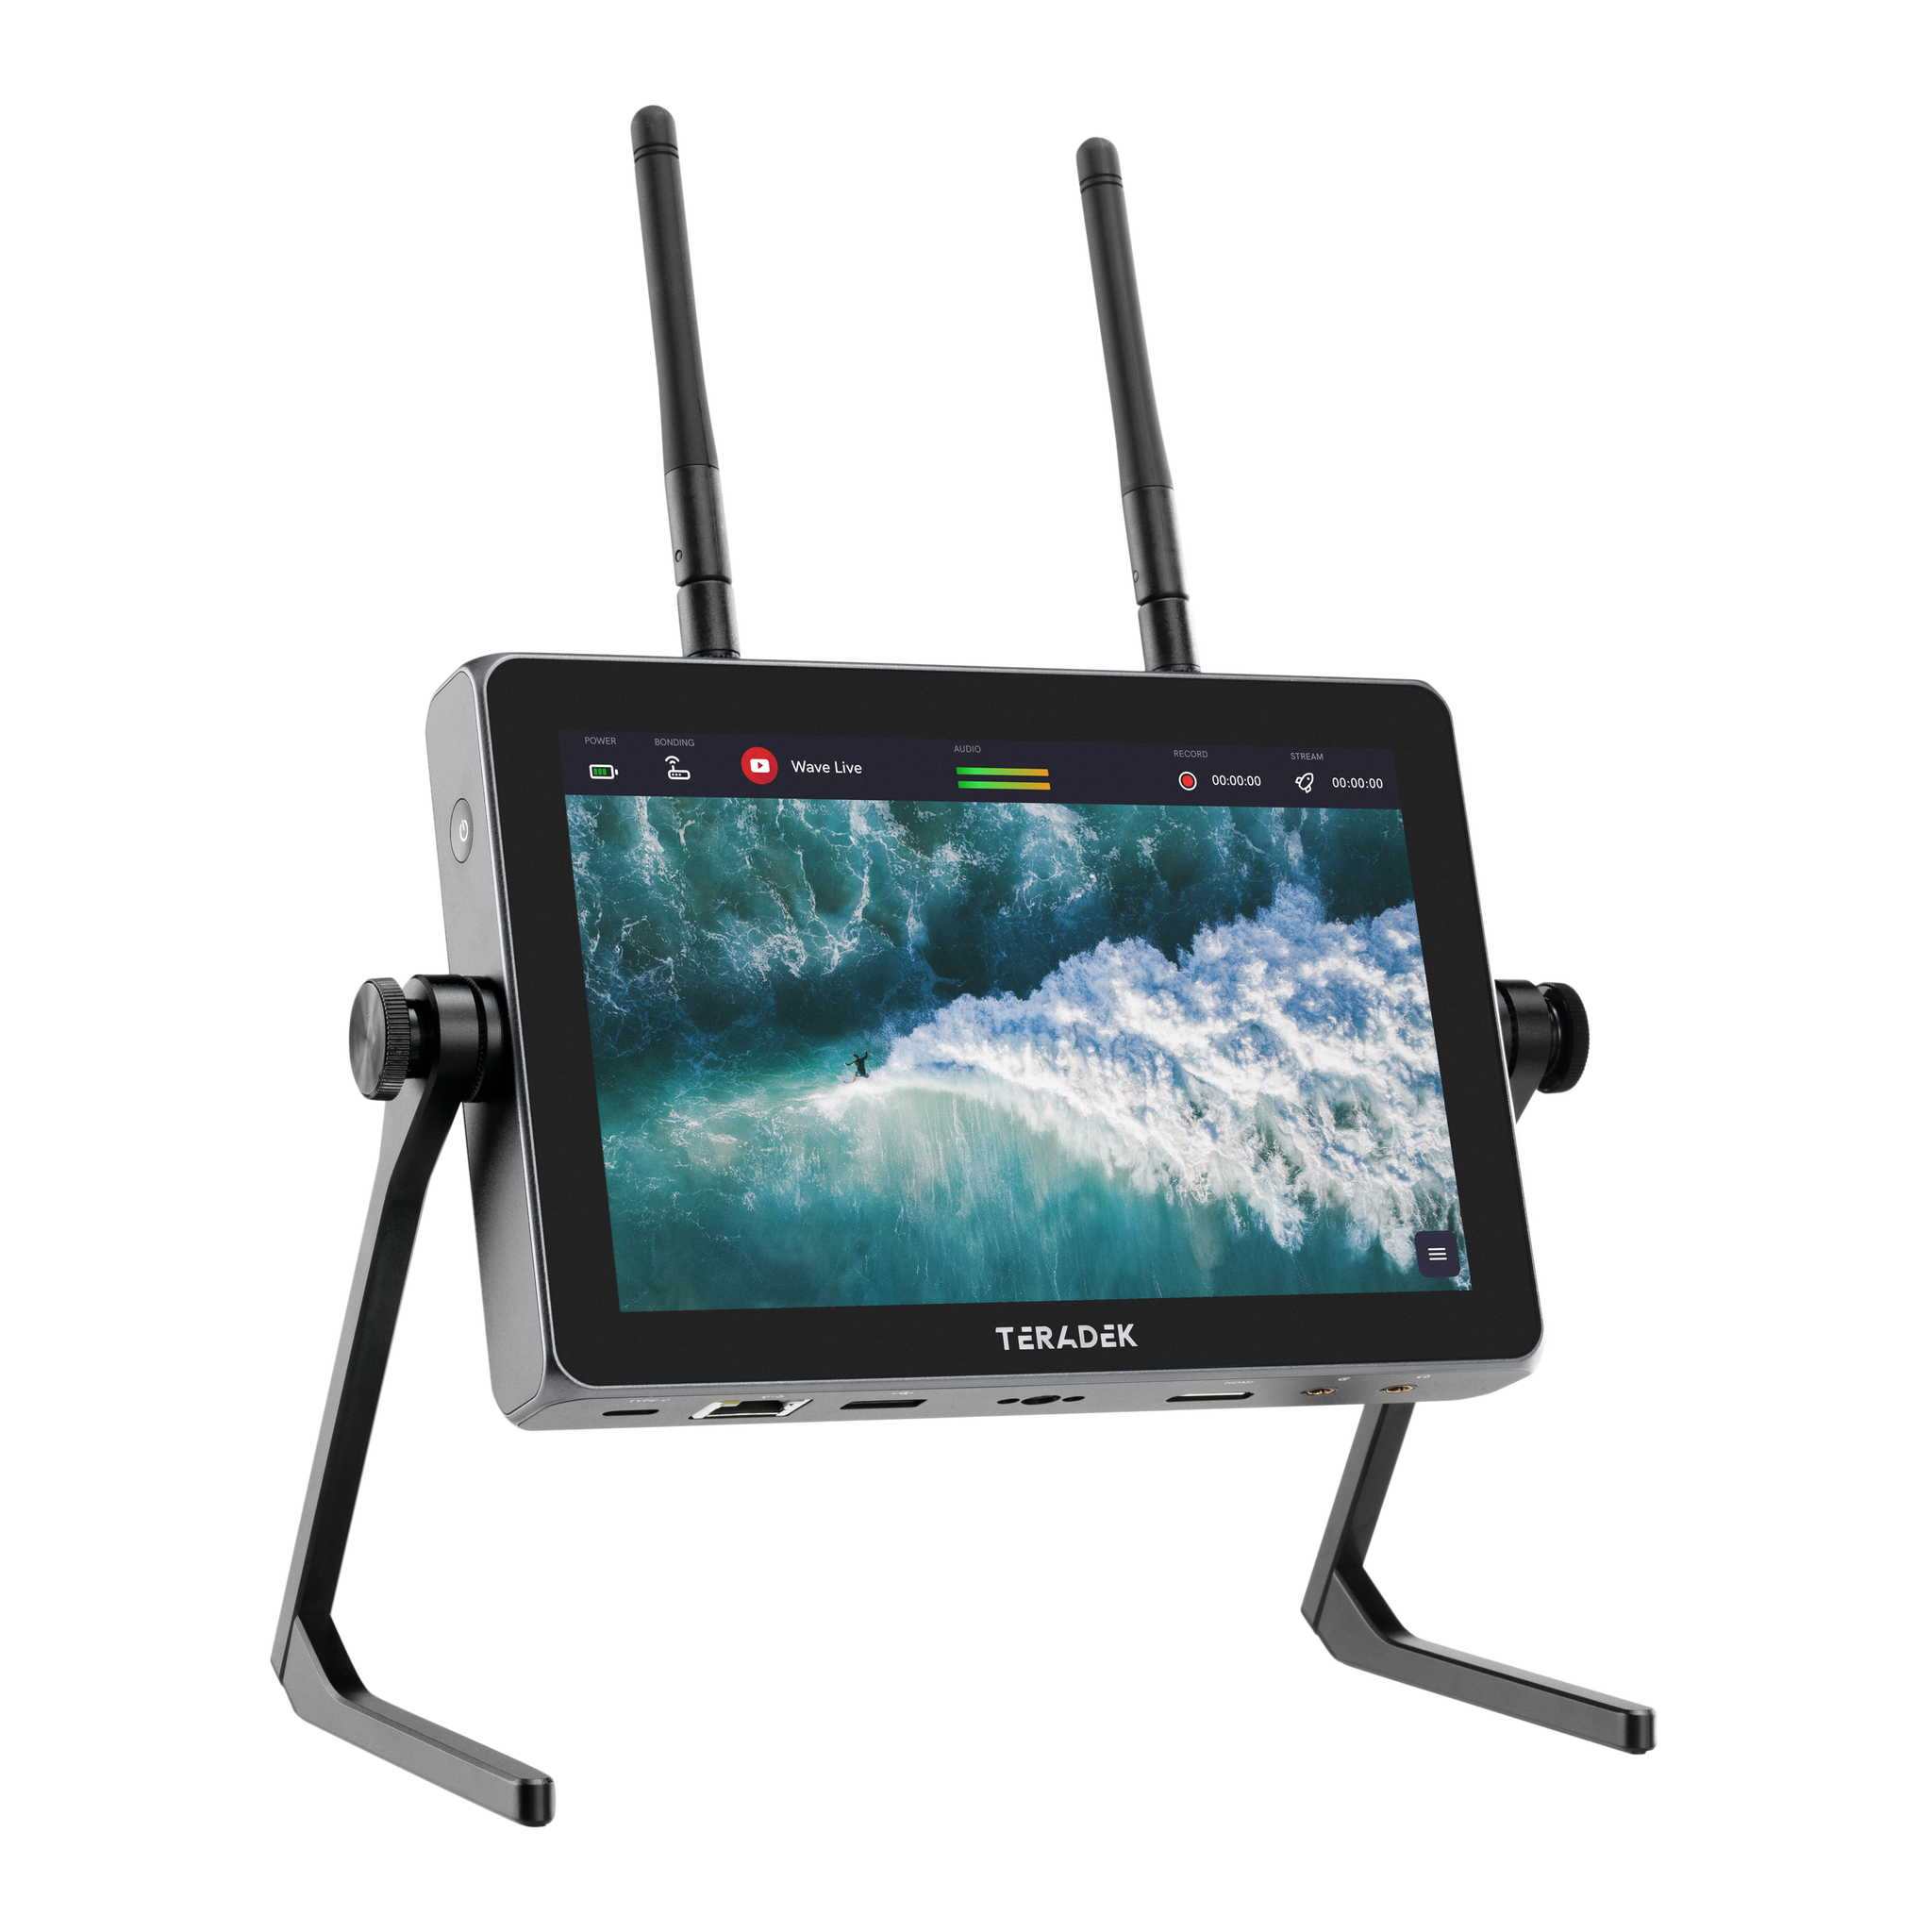 Portable Monitor Singapore: Stay Productive Anywhere with the PRISM+ N